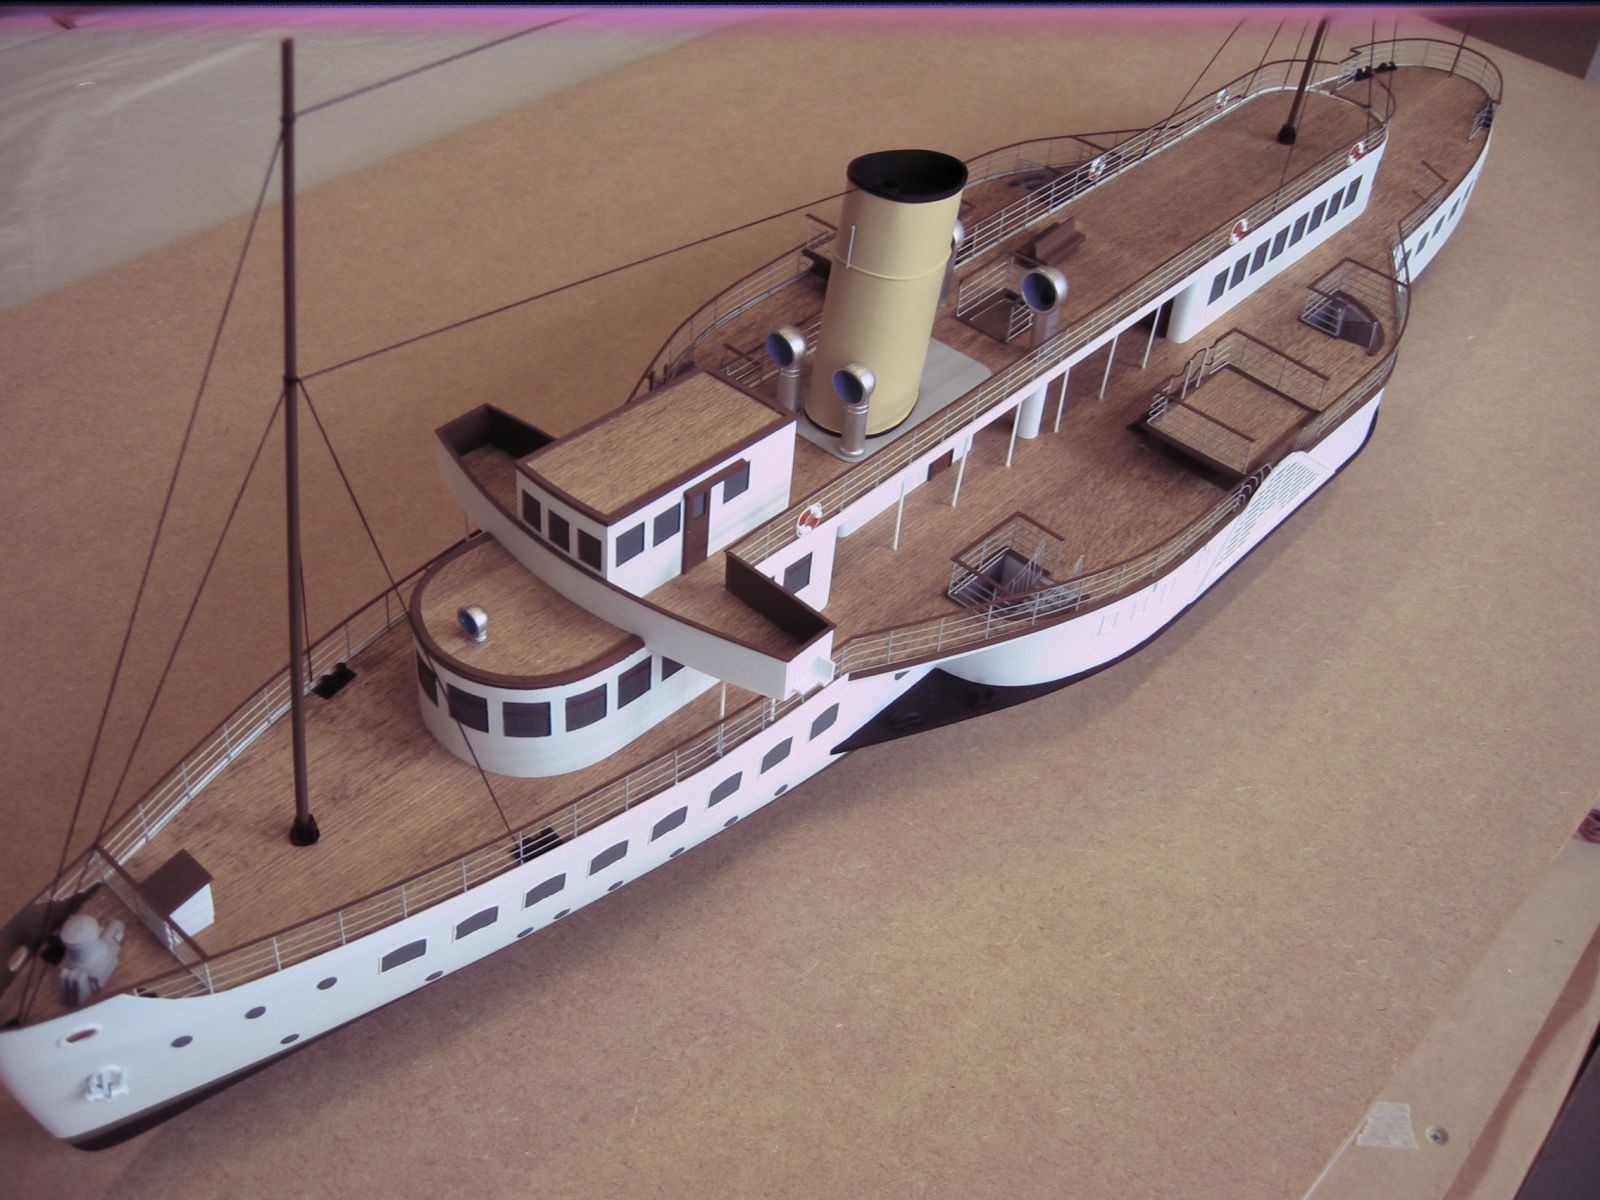 Maid of The Loch, 1:76